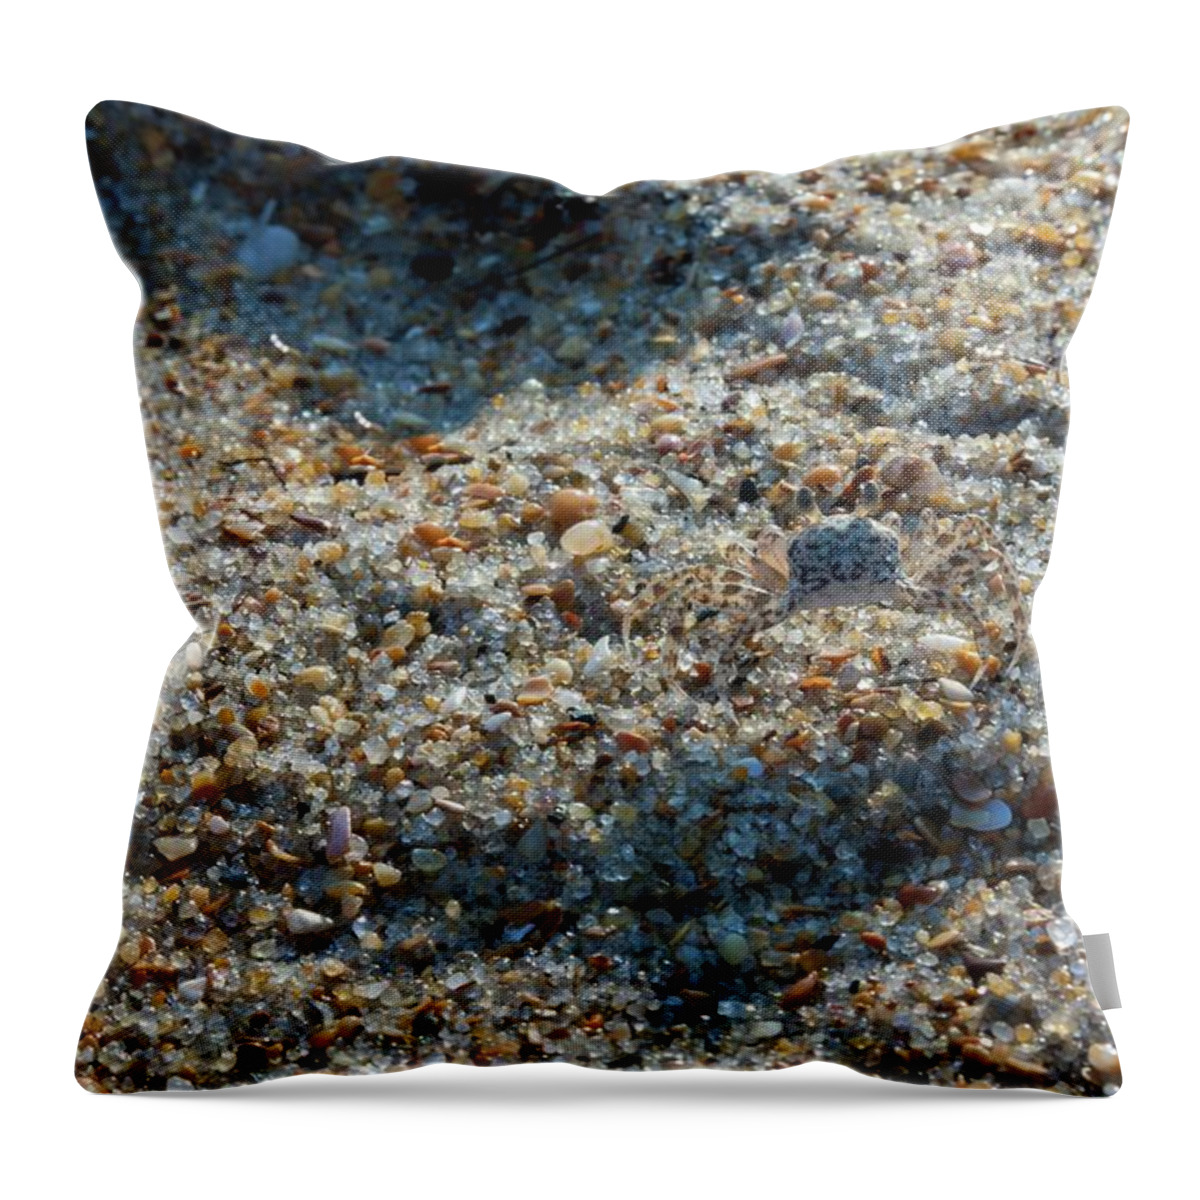 Atlantic Throw Pillow featuring the photograph Crab Camoflage by Liza Eckardt